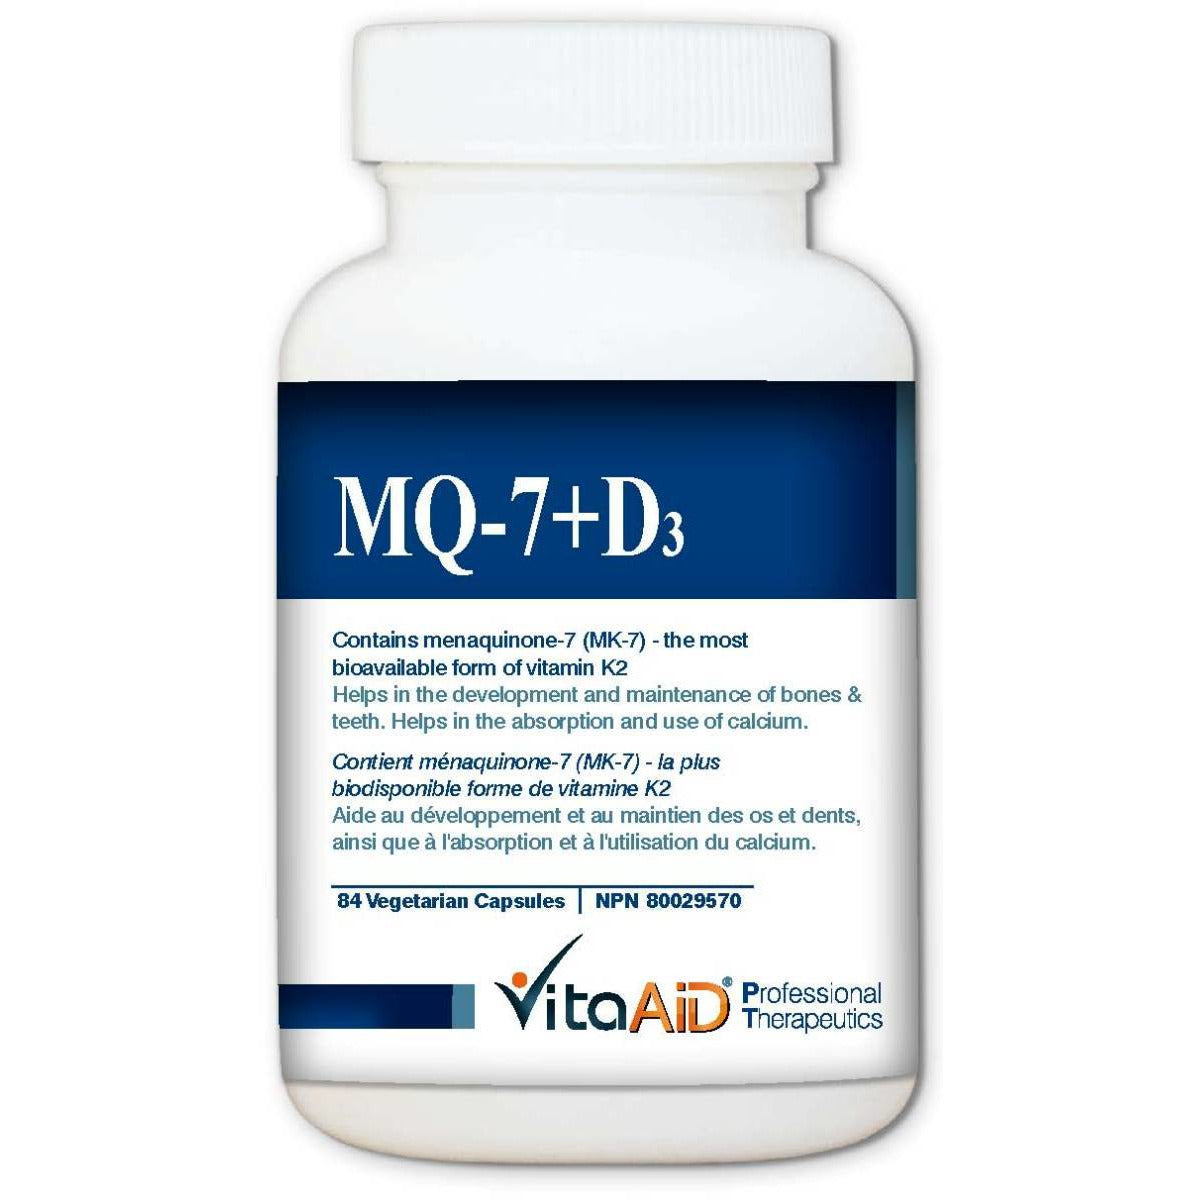 MQ-7 D3  Prevents Vascular Calcification and CVD, Increases Bone Mineral Density, and Promotes Healthy Platelet Function 84 veg caps